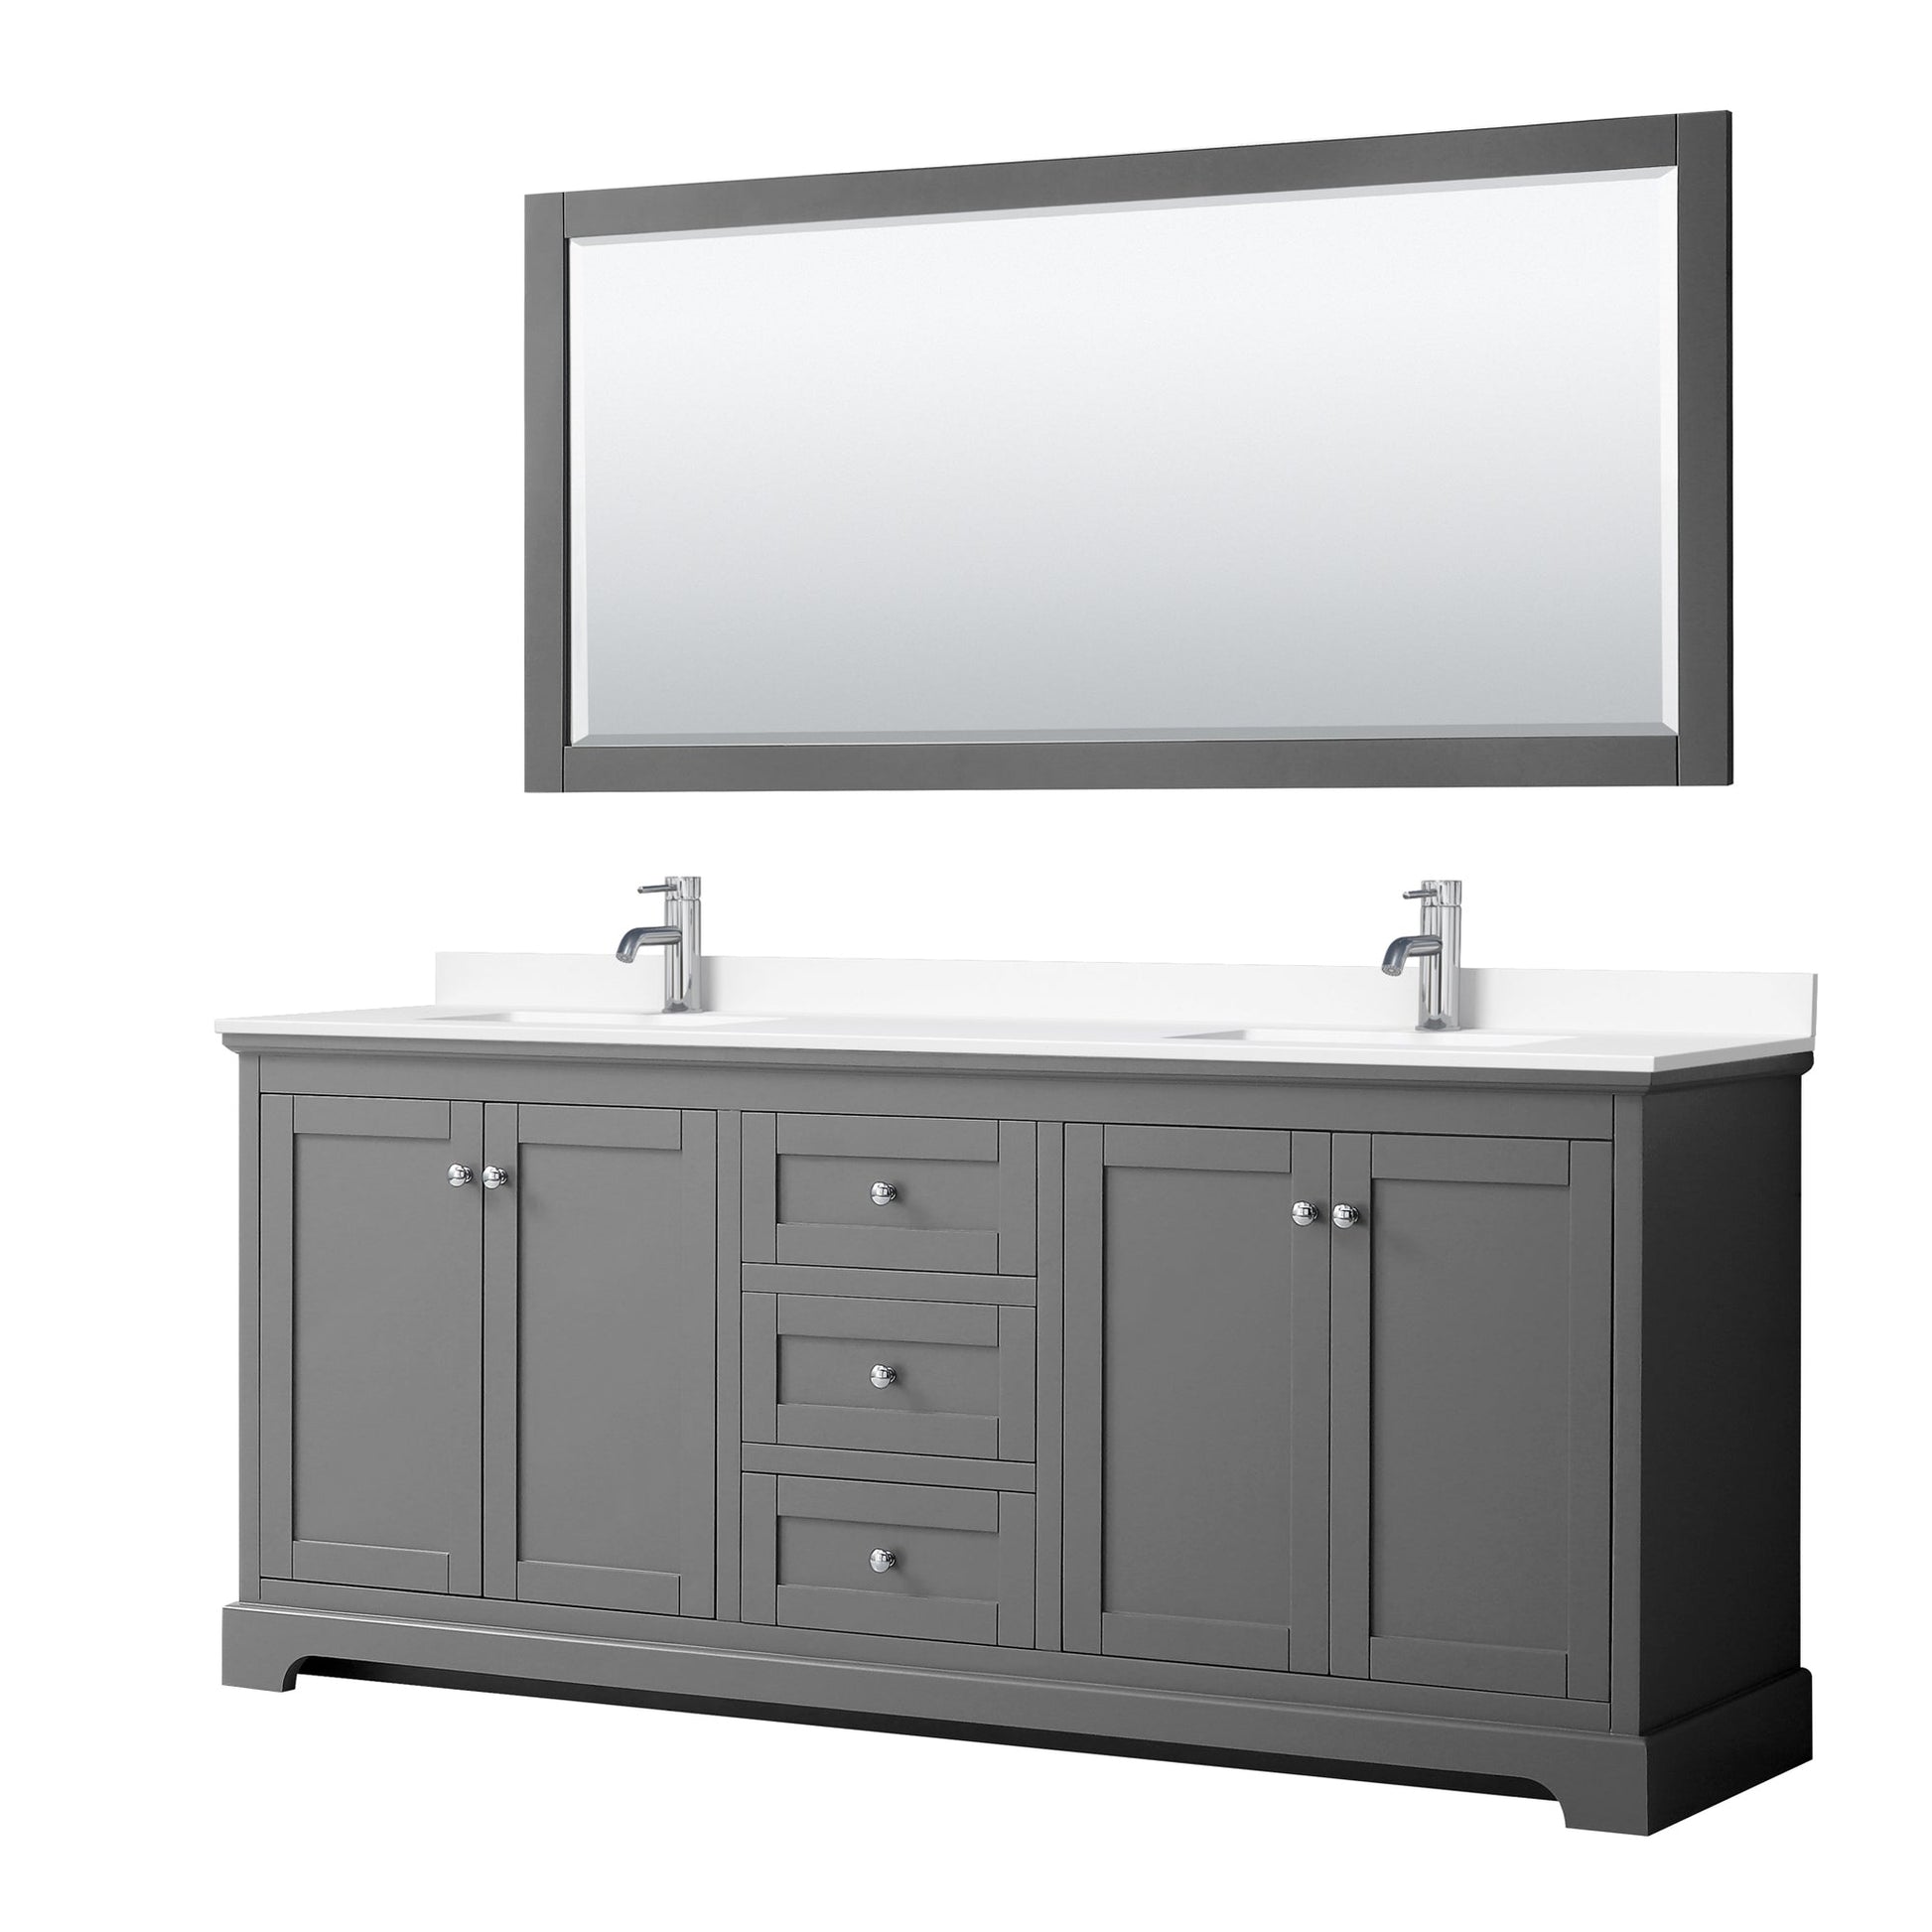 Wyndham Collection Avery 80" Double Bathroom Vanity in Dark Gray With White Cultured Marble Countertop, Undermount Square Sink and 70" Mirror